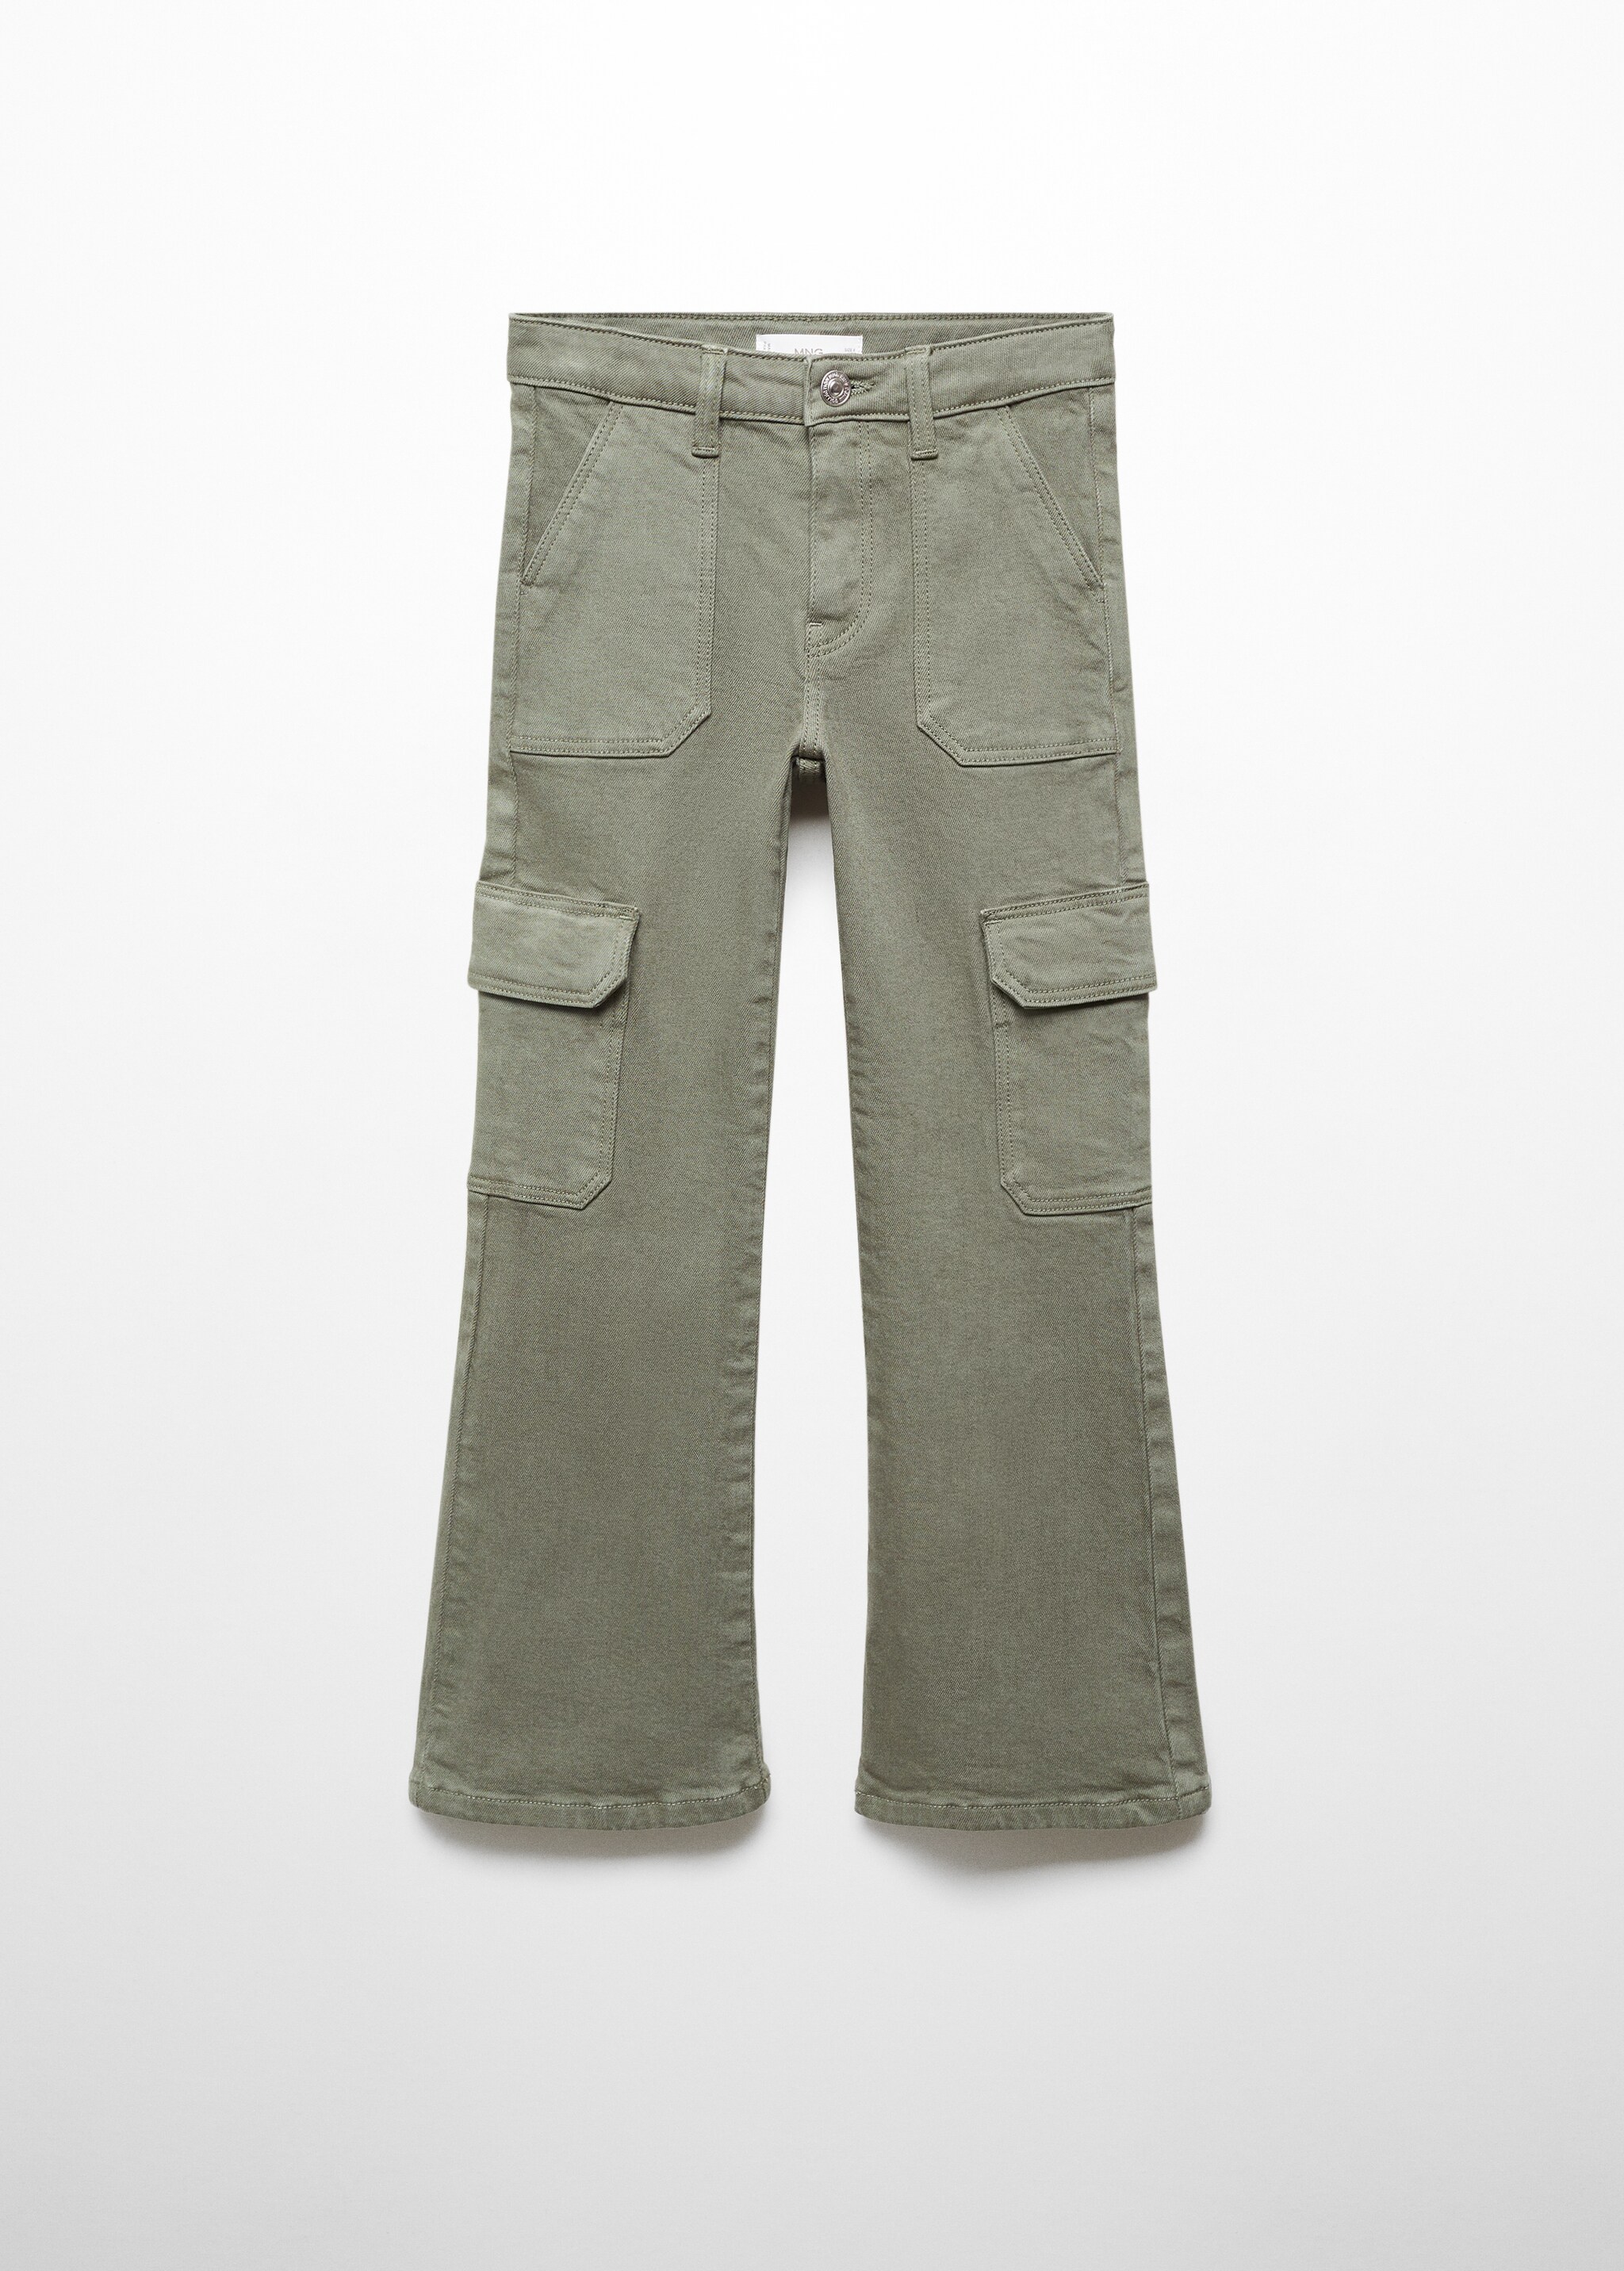 Pocket cargo jeans - Article without model